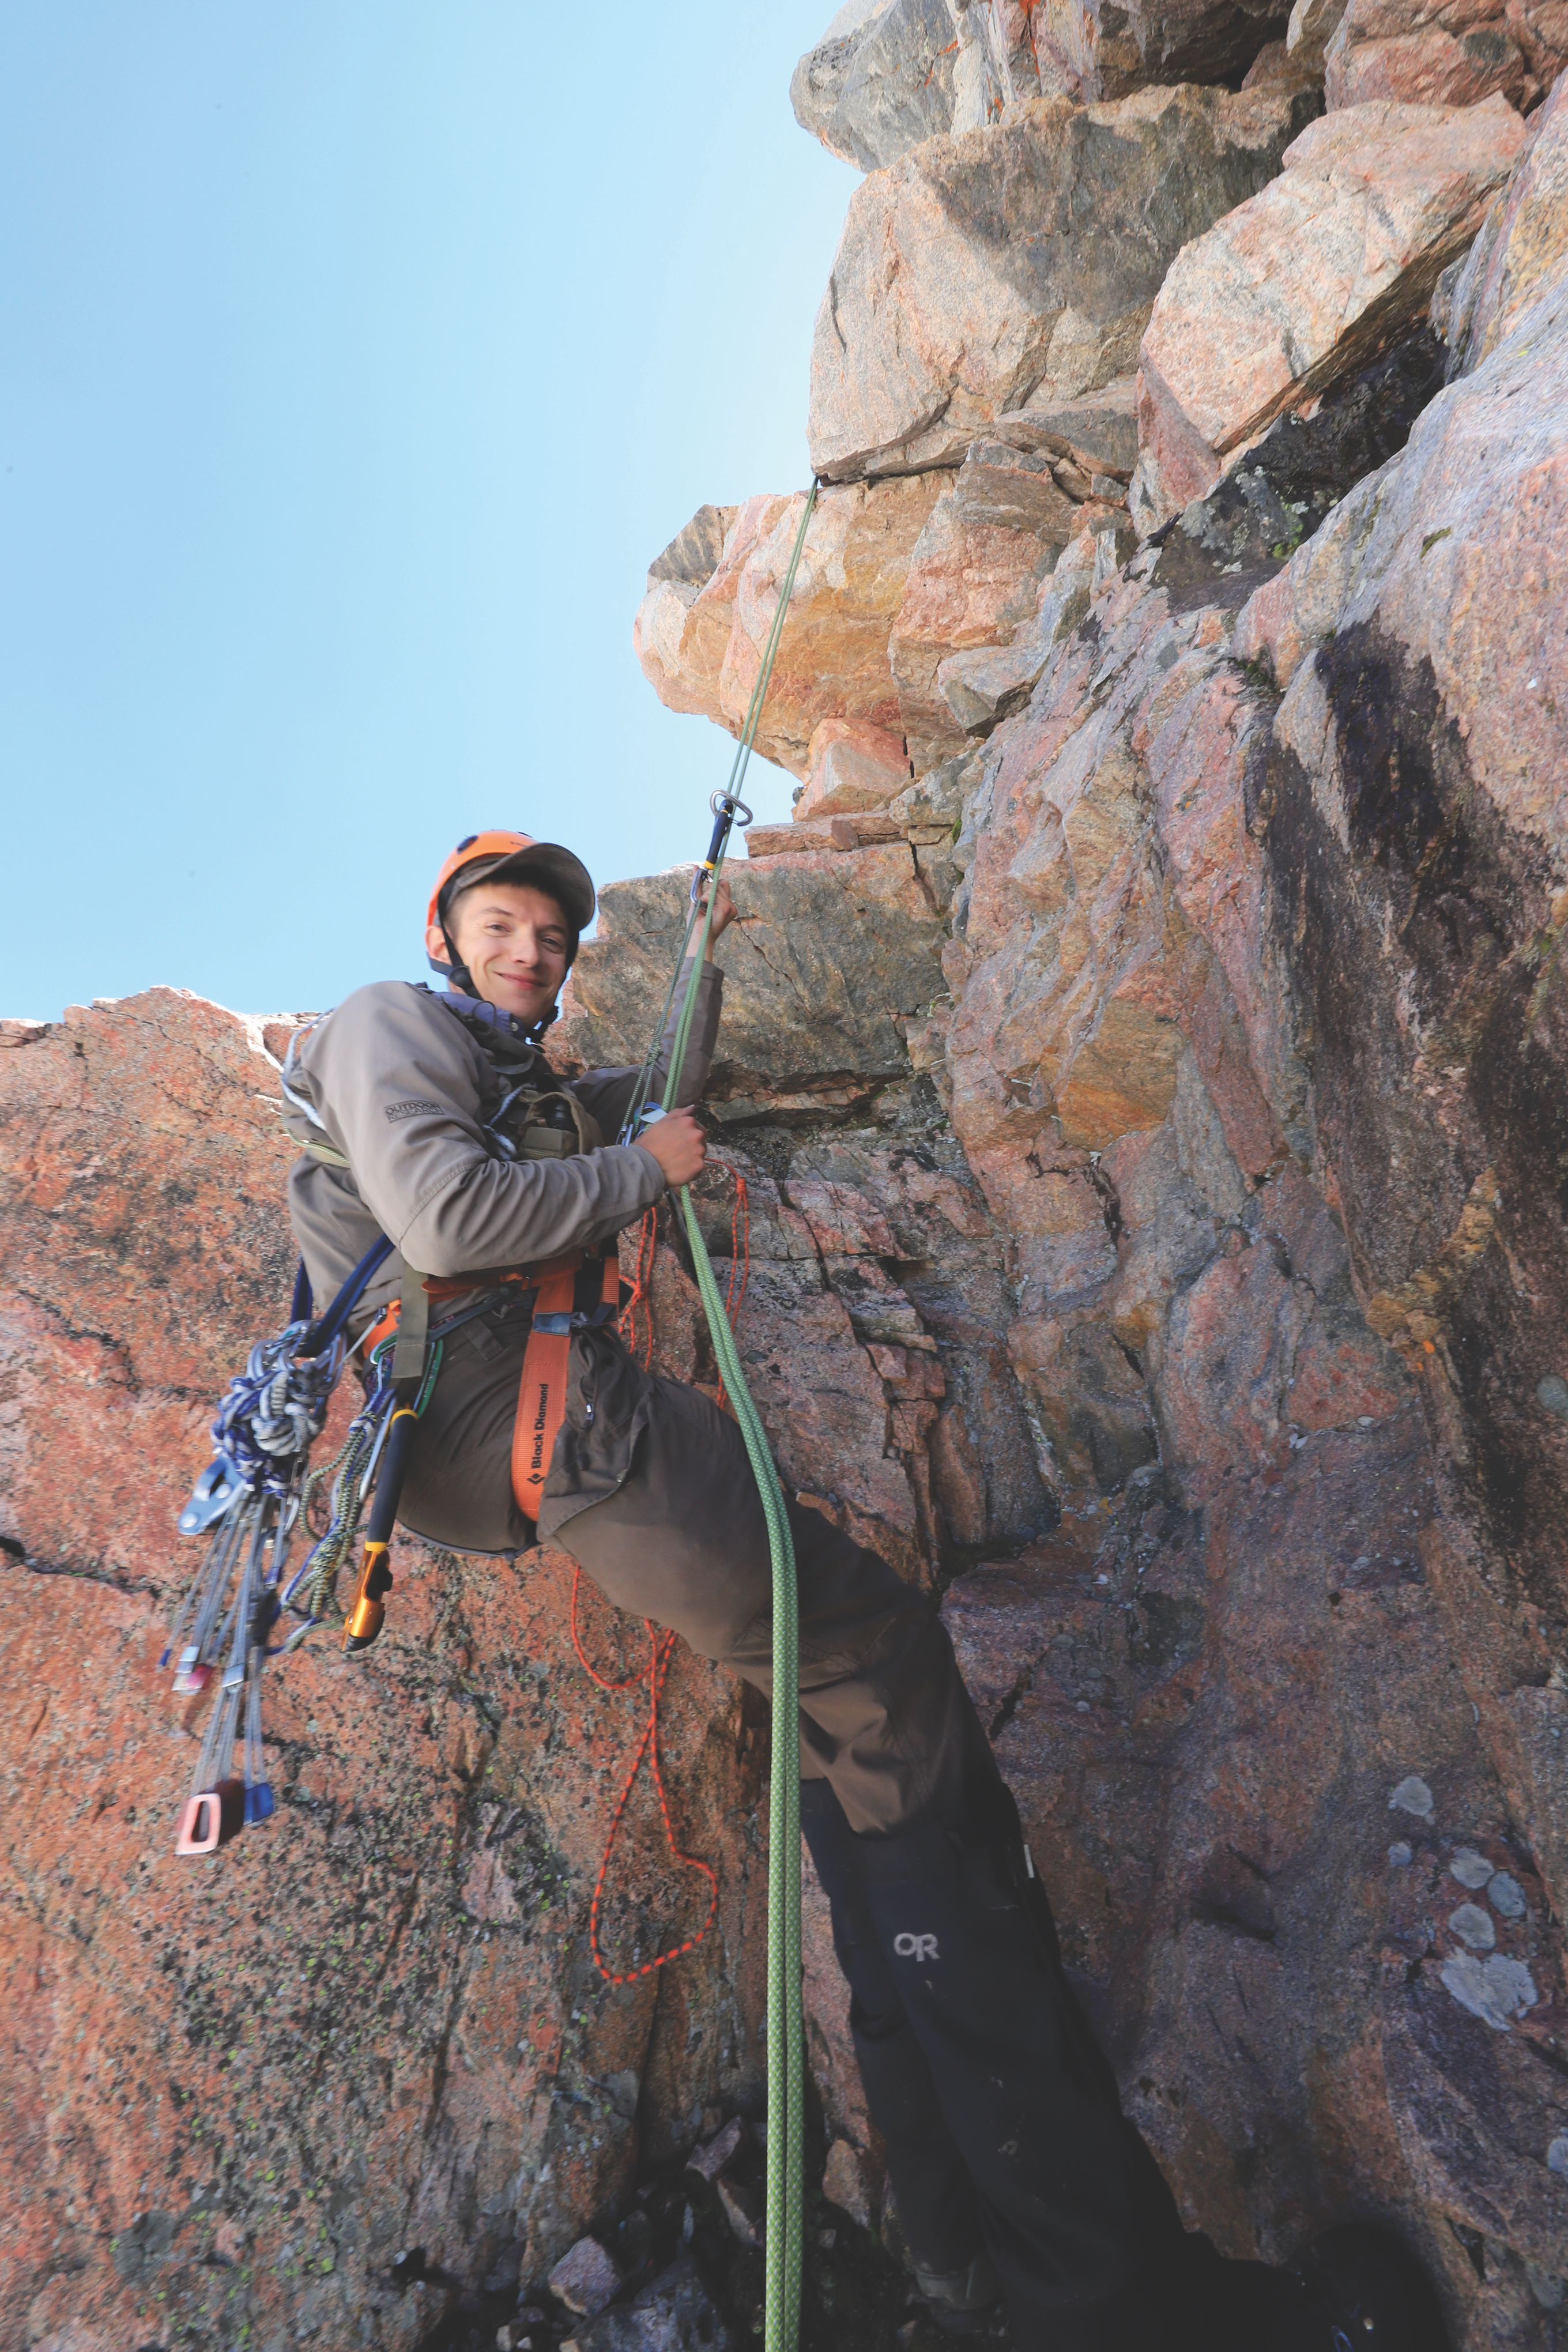 Carl Brown is no stranger to mountaineering, and his experience has proven invaluable throughout his study. Gaining access to black rosy finch nests requires skills in hiking, climbing and rappelling. Photo by Mark Gocke